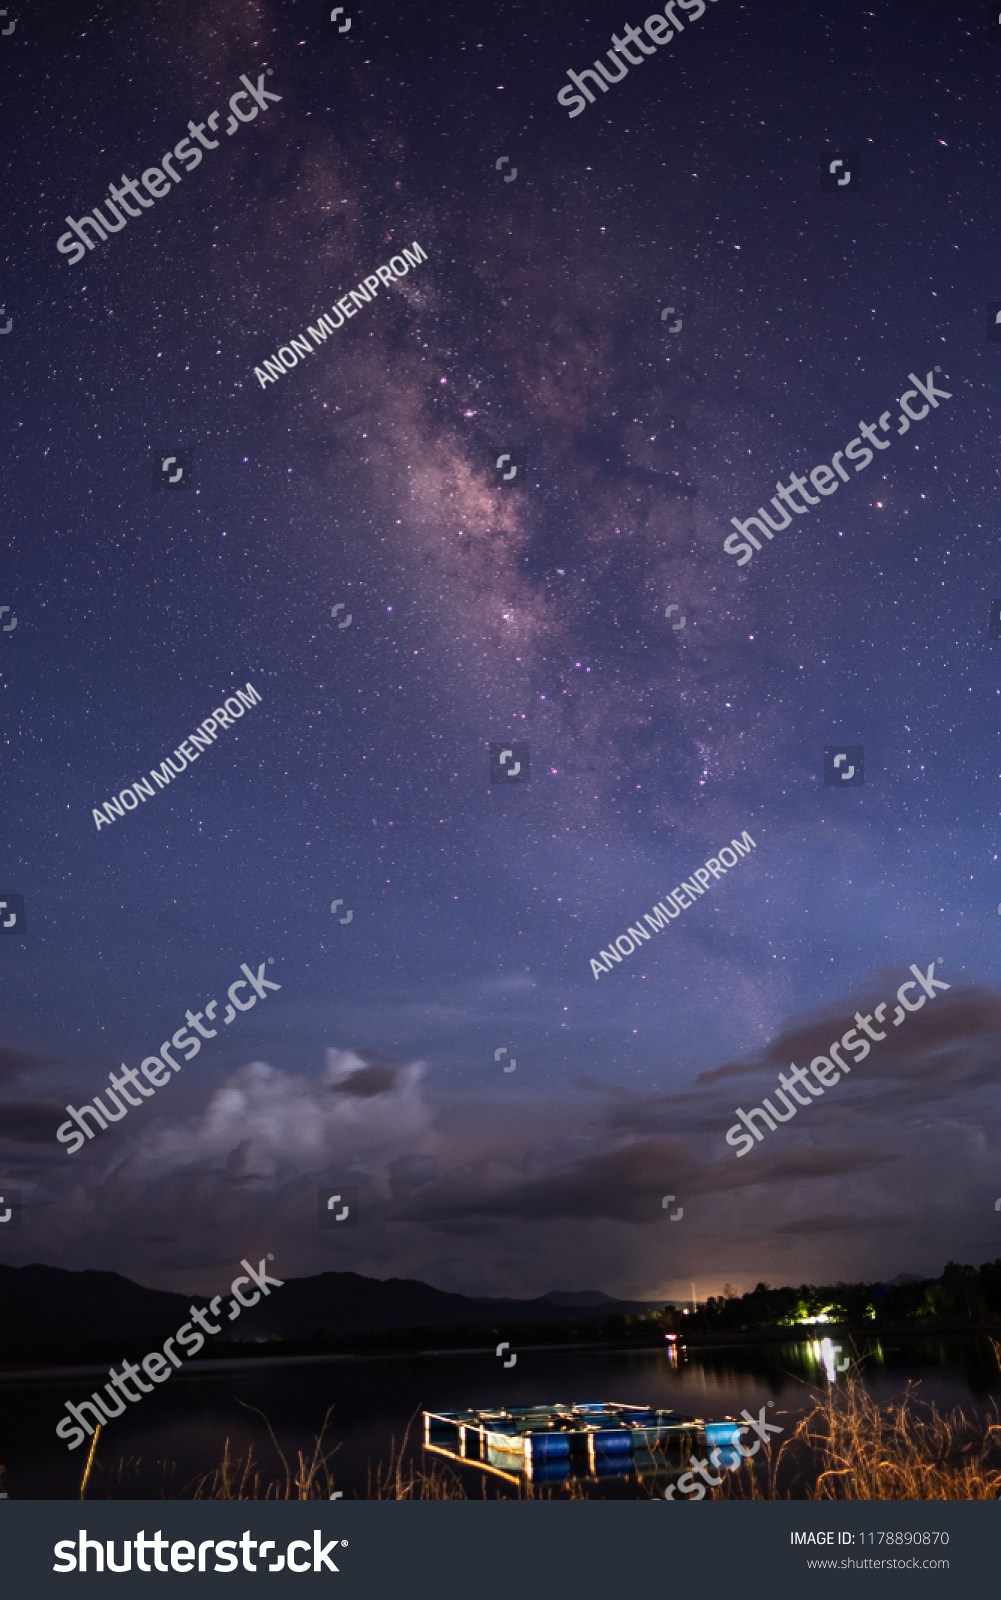 Clouds, stars and the Milky Way in the night sky. #1178890870